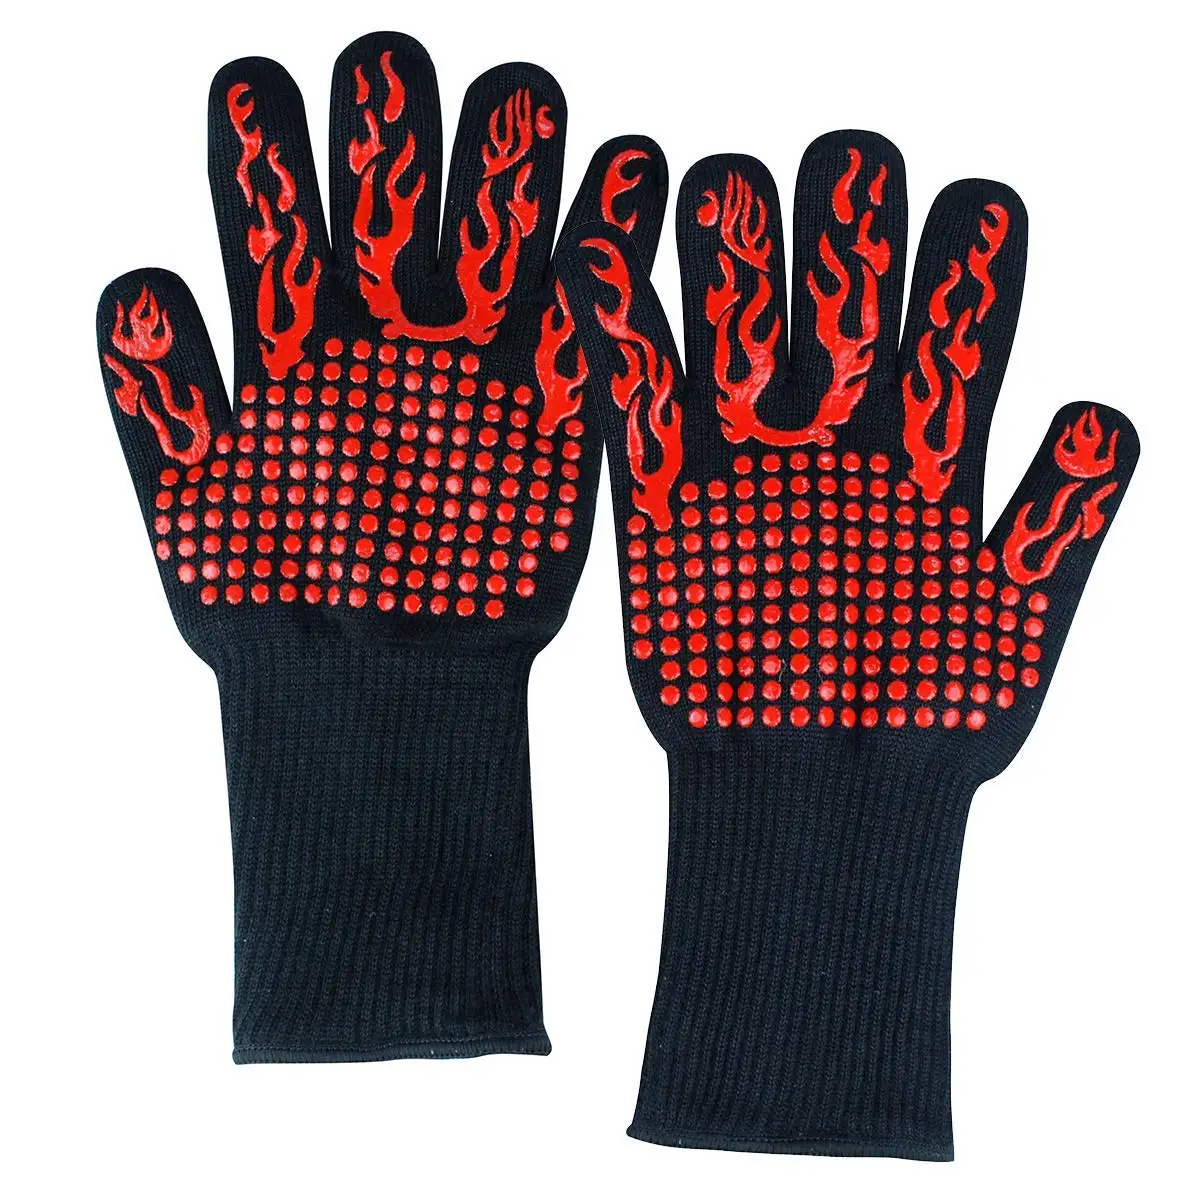 Buy TOOGOU BBQ Grilling Cooking Gloves - 932°F Extreme Heat Resistant ...